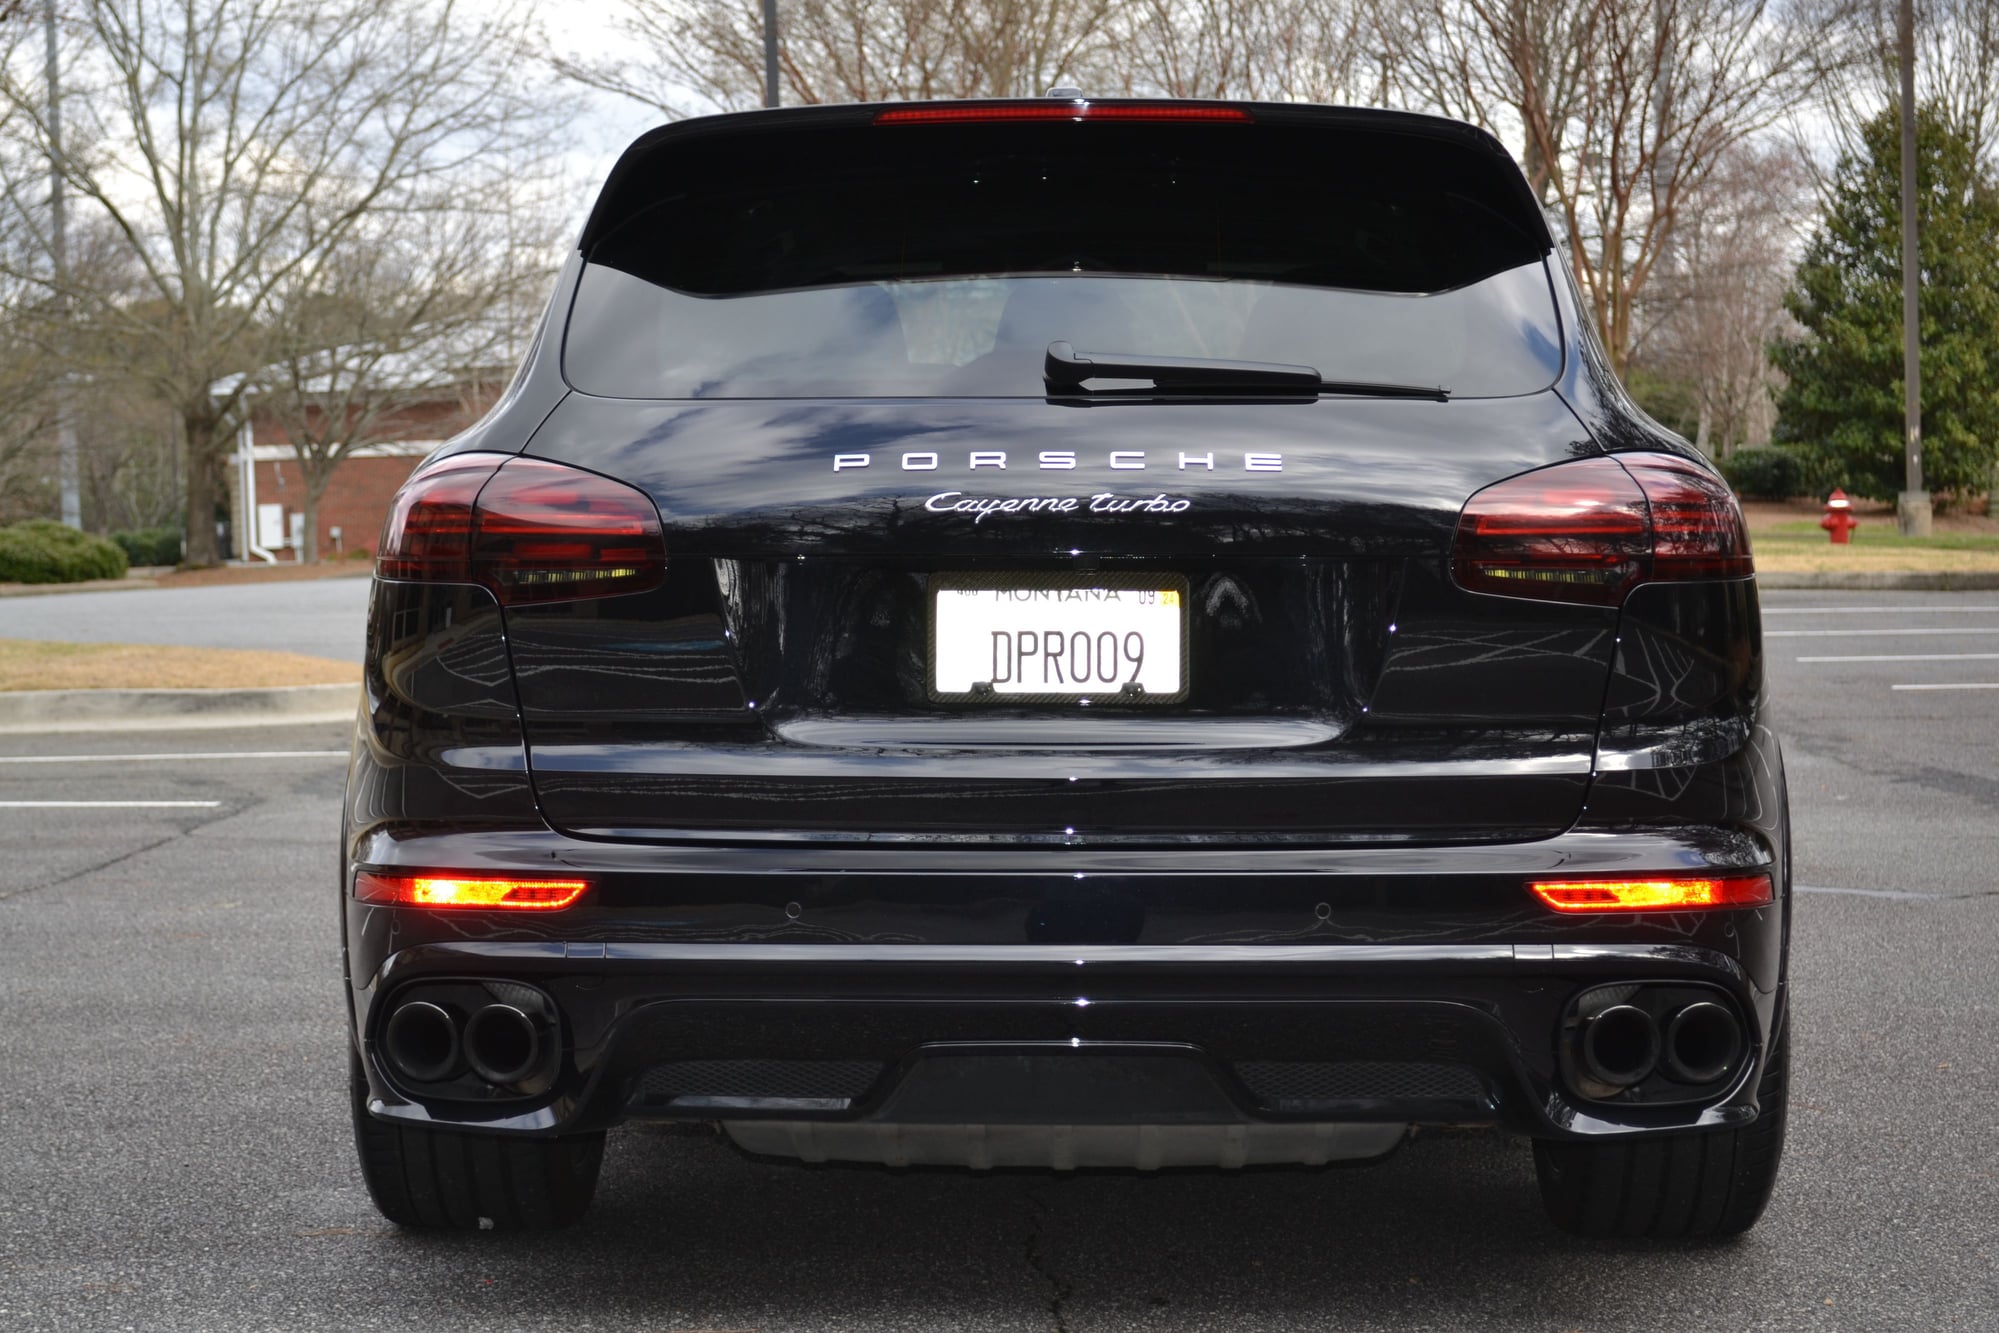 2017 Porsche Cayenne - 2017 Porsche Cayenne Turbo, only 45k miles, $150k MSRP, loaded w/options, immaculate! - Used - VIN WP1AC2A27HLA92983 - 45,000 Miles - 8 cyl - AWD - Automatic - SUV - Black - Duluth, GA 30097, United States